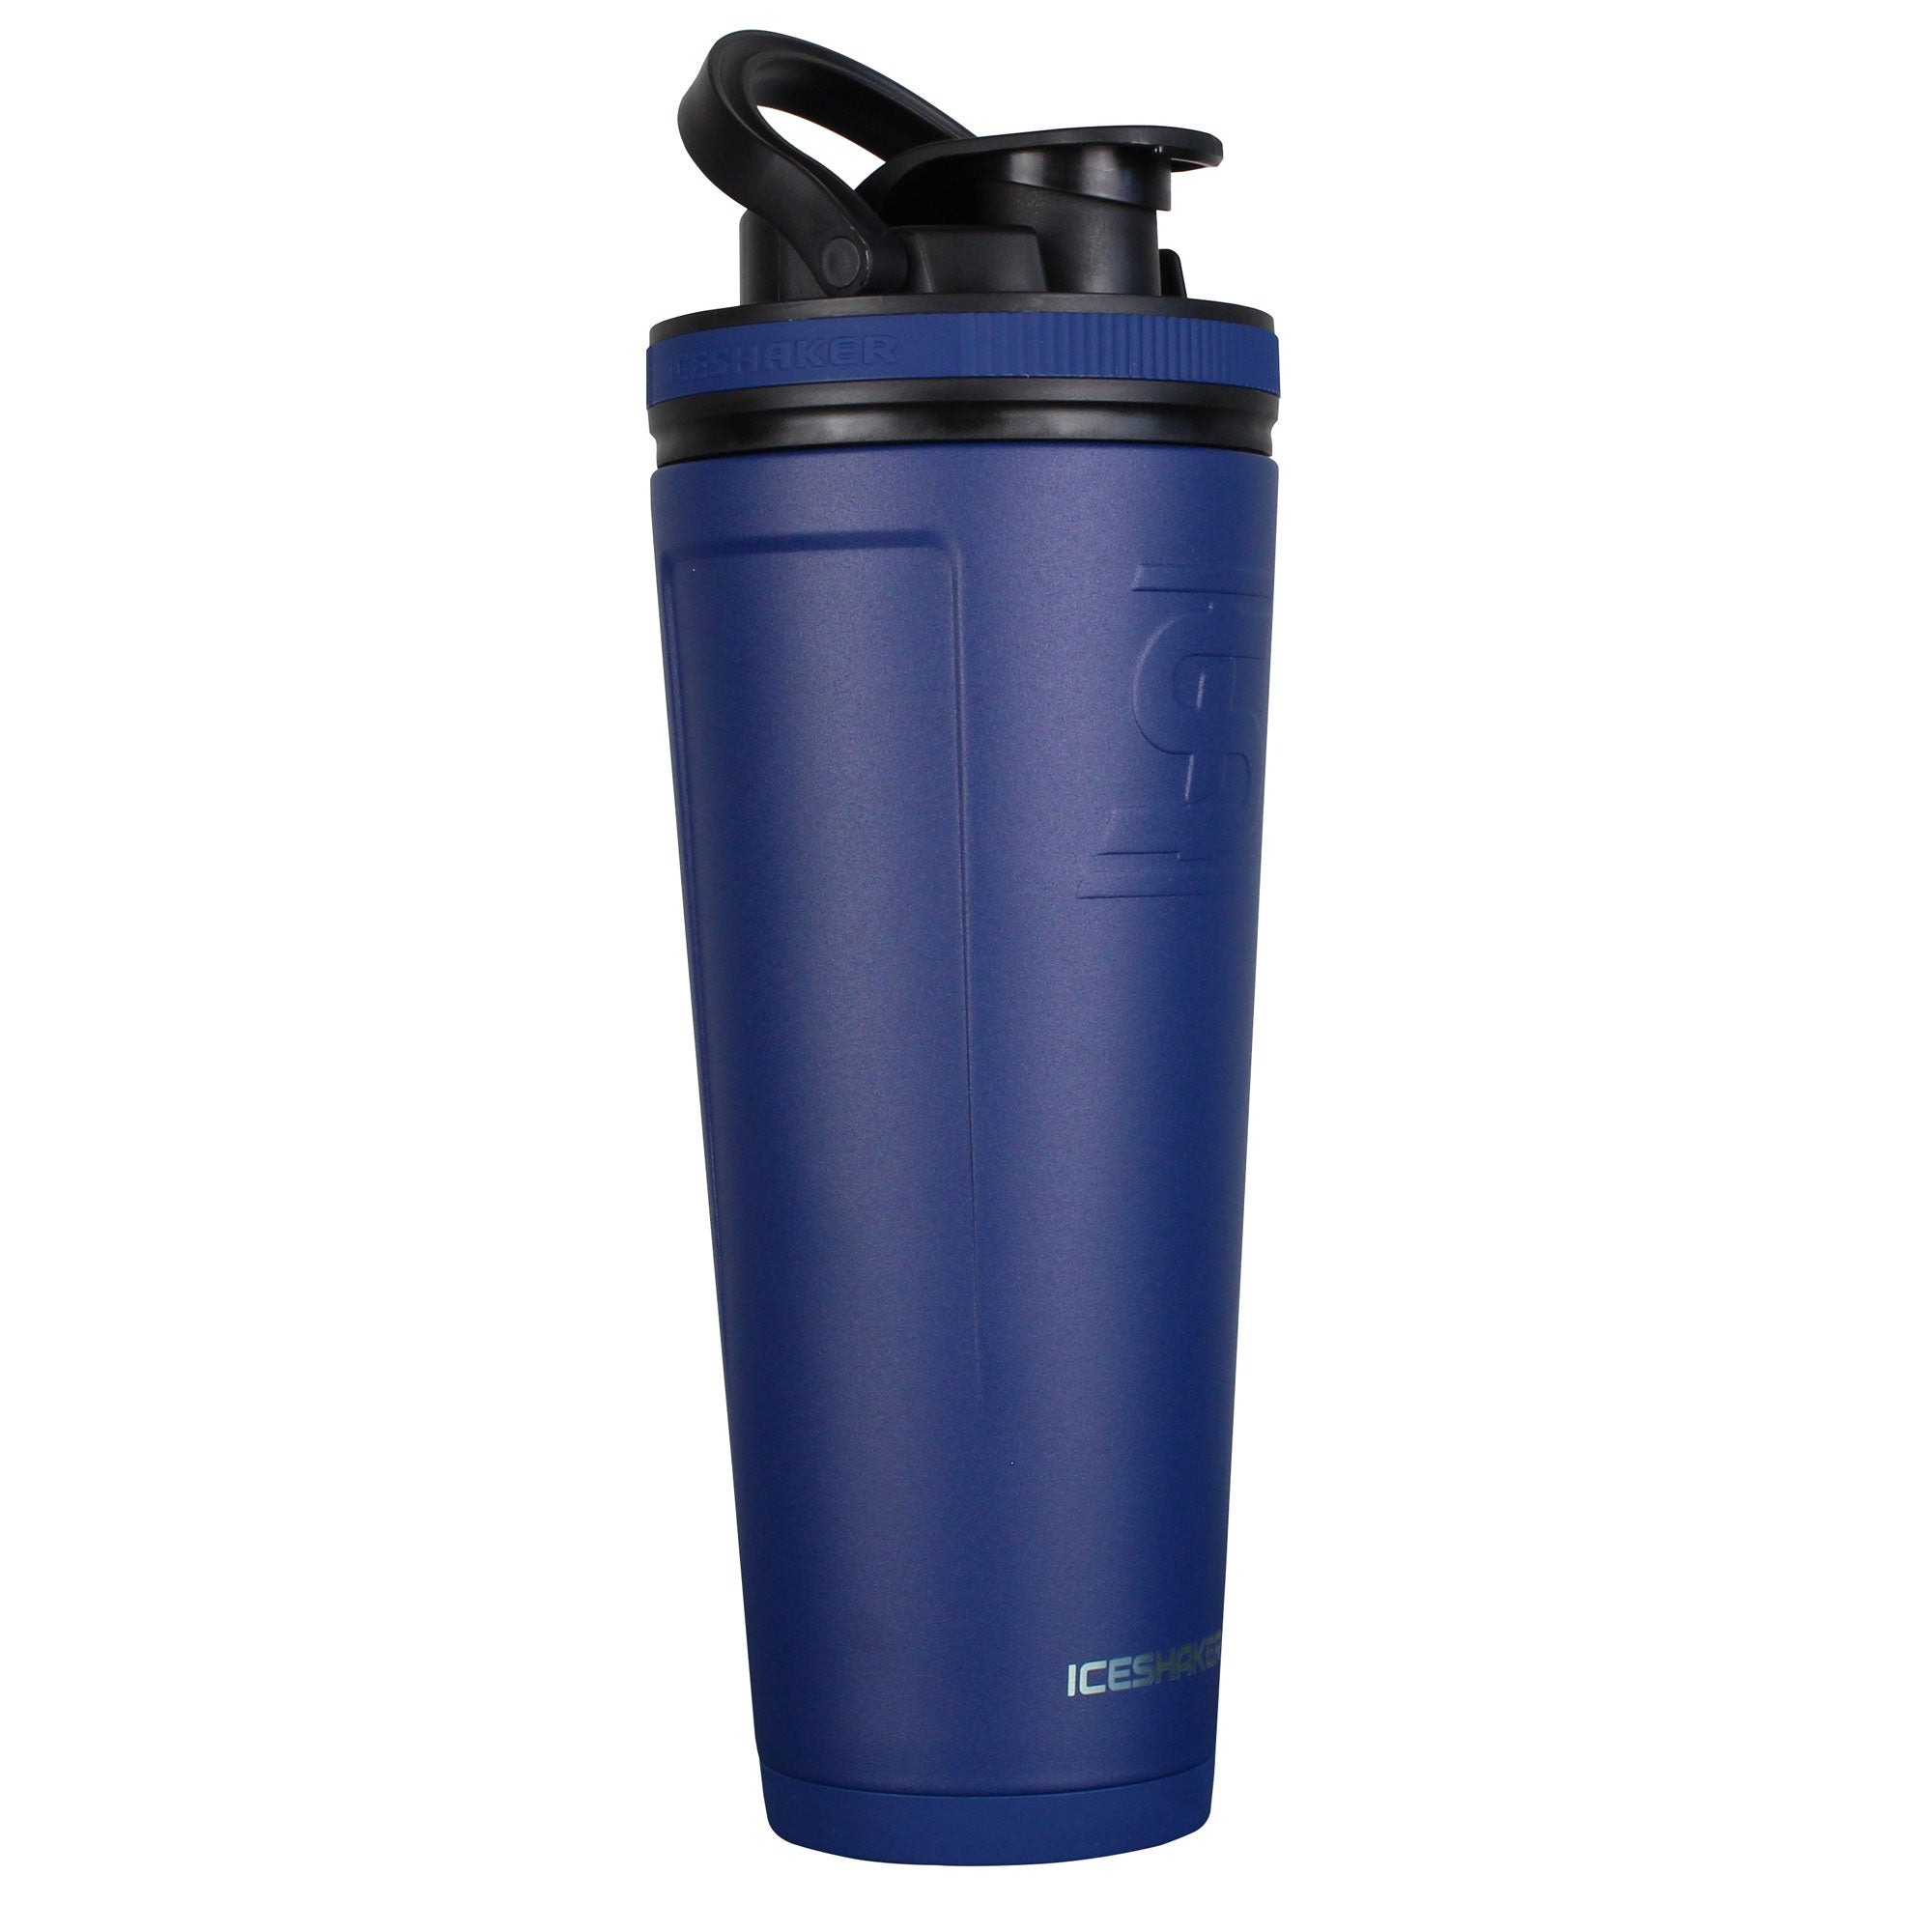 Ice Shaker Double Walled Vacuum Insulated, Skinny Protein Shaker Bottle, Purple & Teal, 20 oz., Size: 20 fl oz